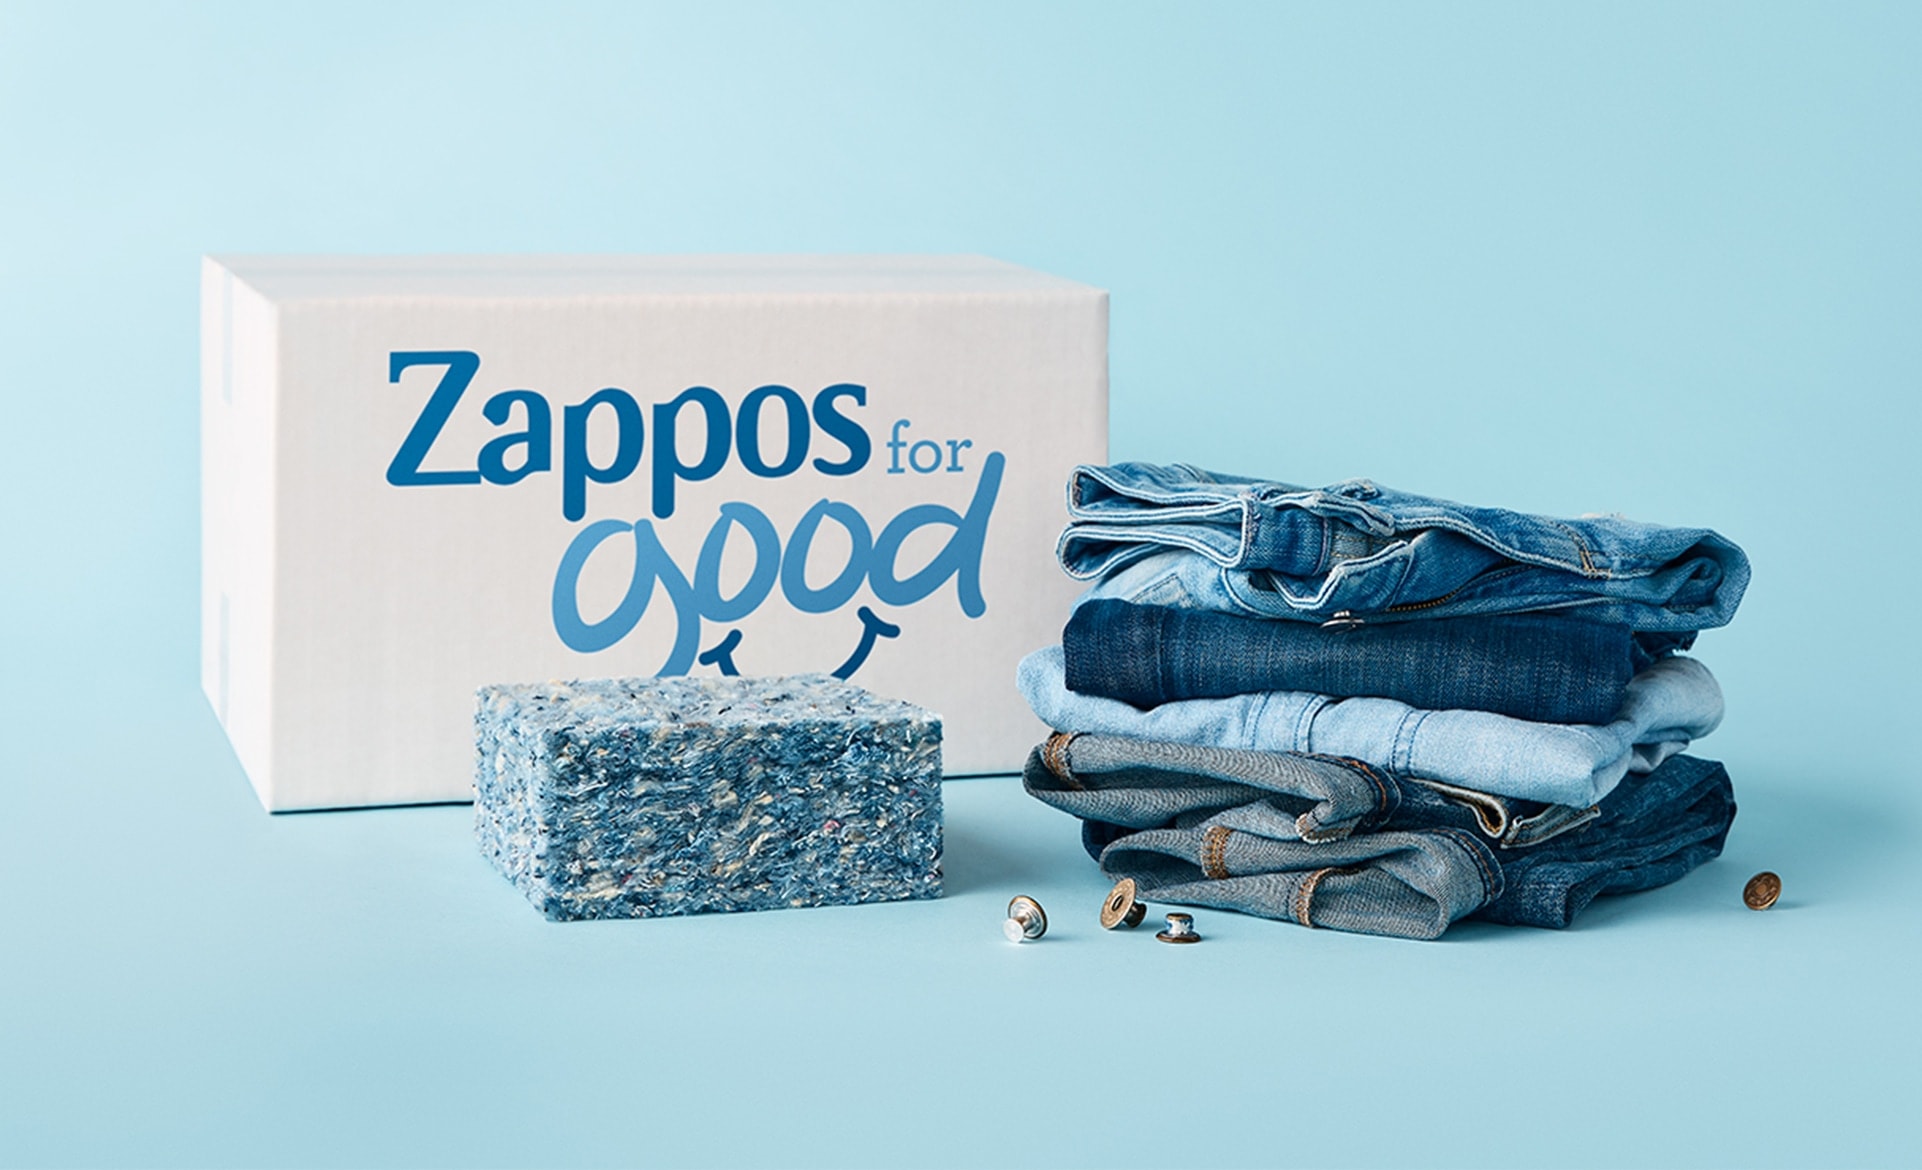 Zappos for Good recycle by mail program